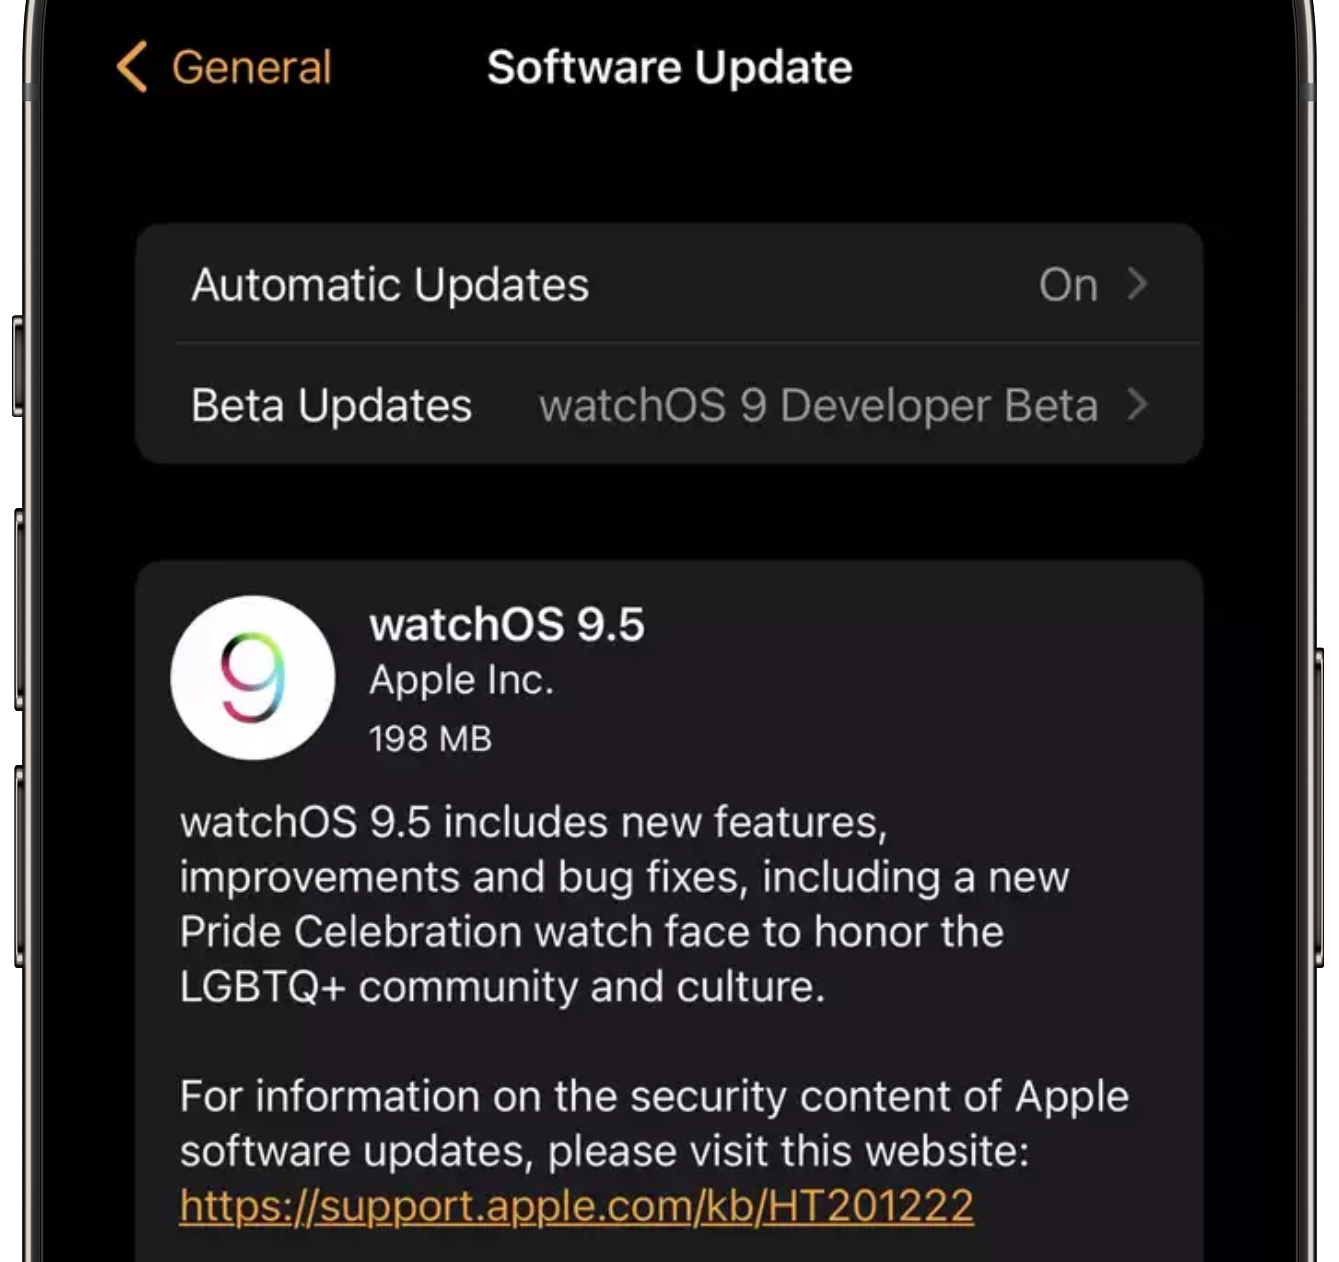 watchos 9.5 release notes